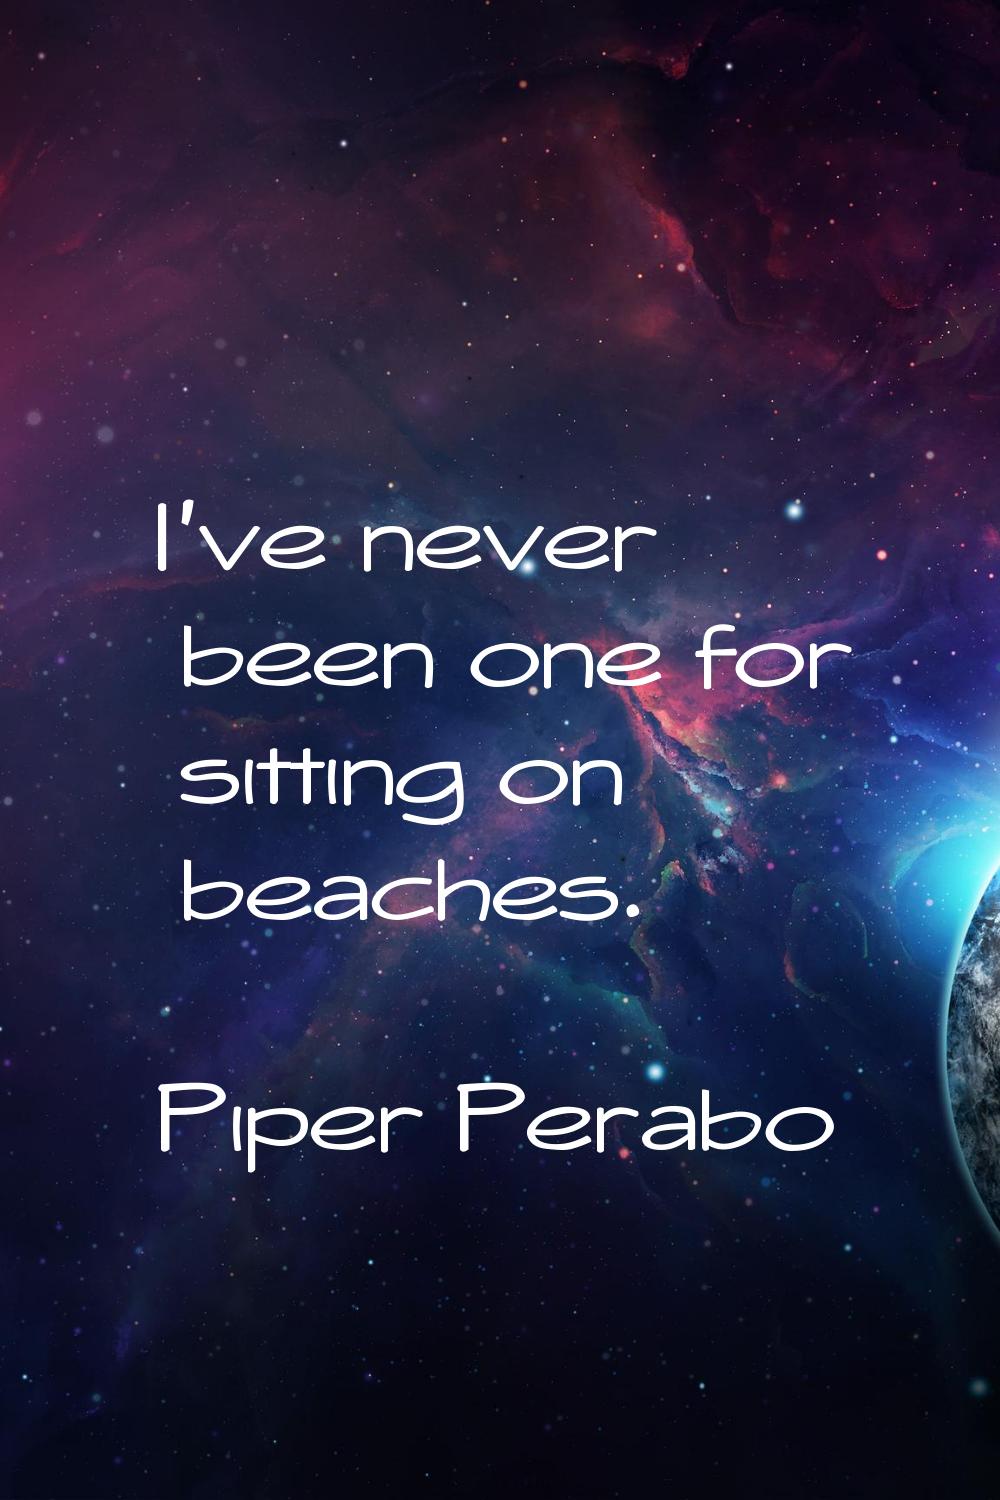 I've never been one for sitting on beaches.